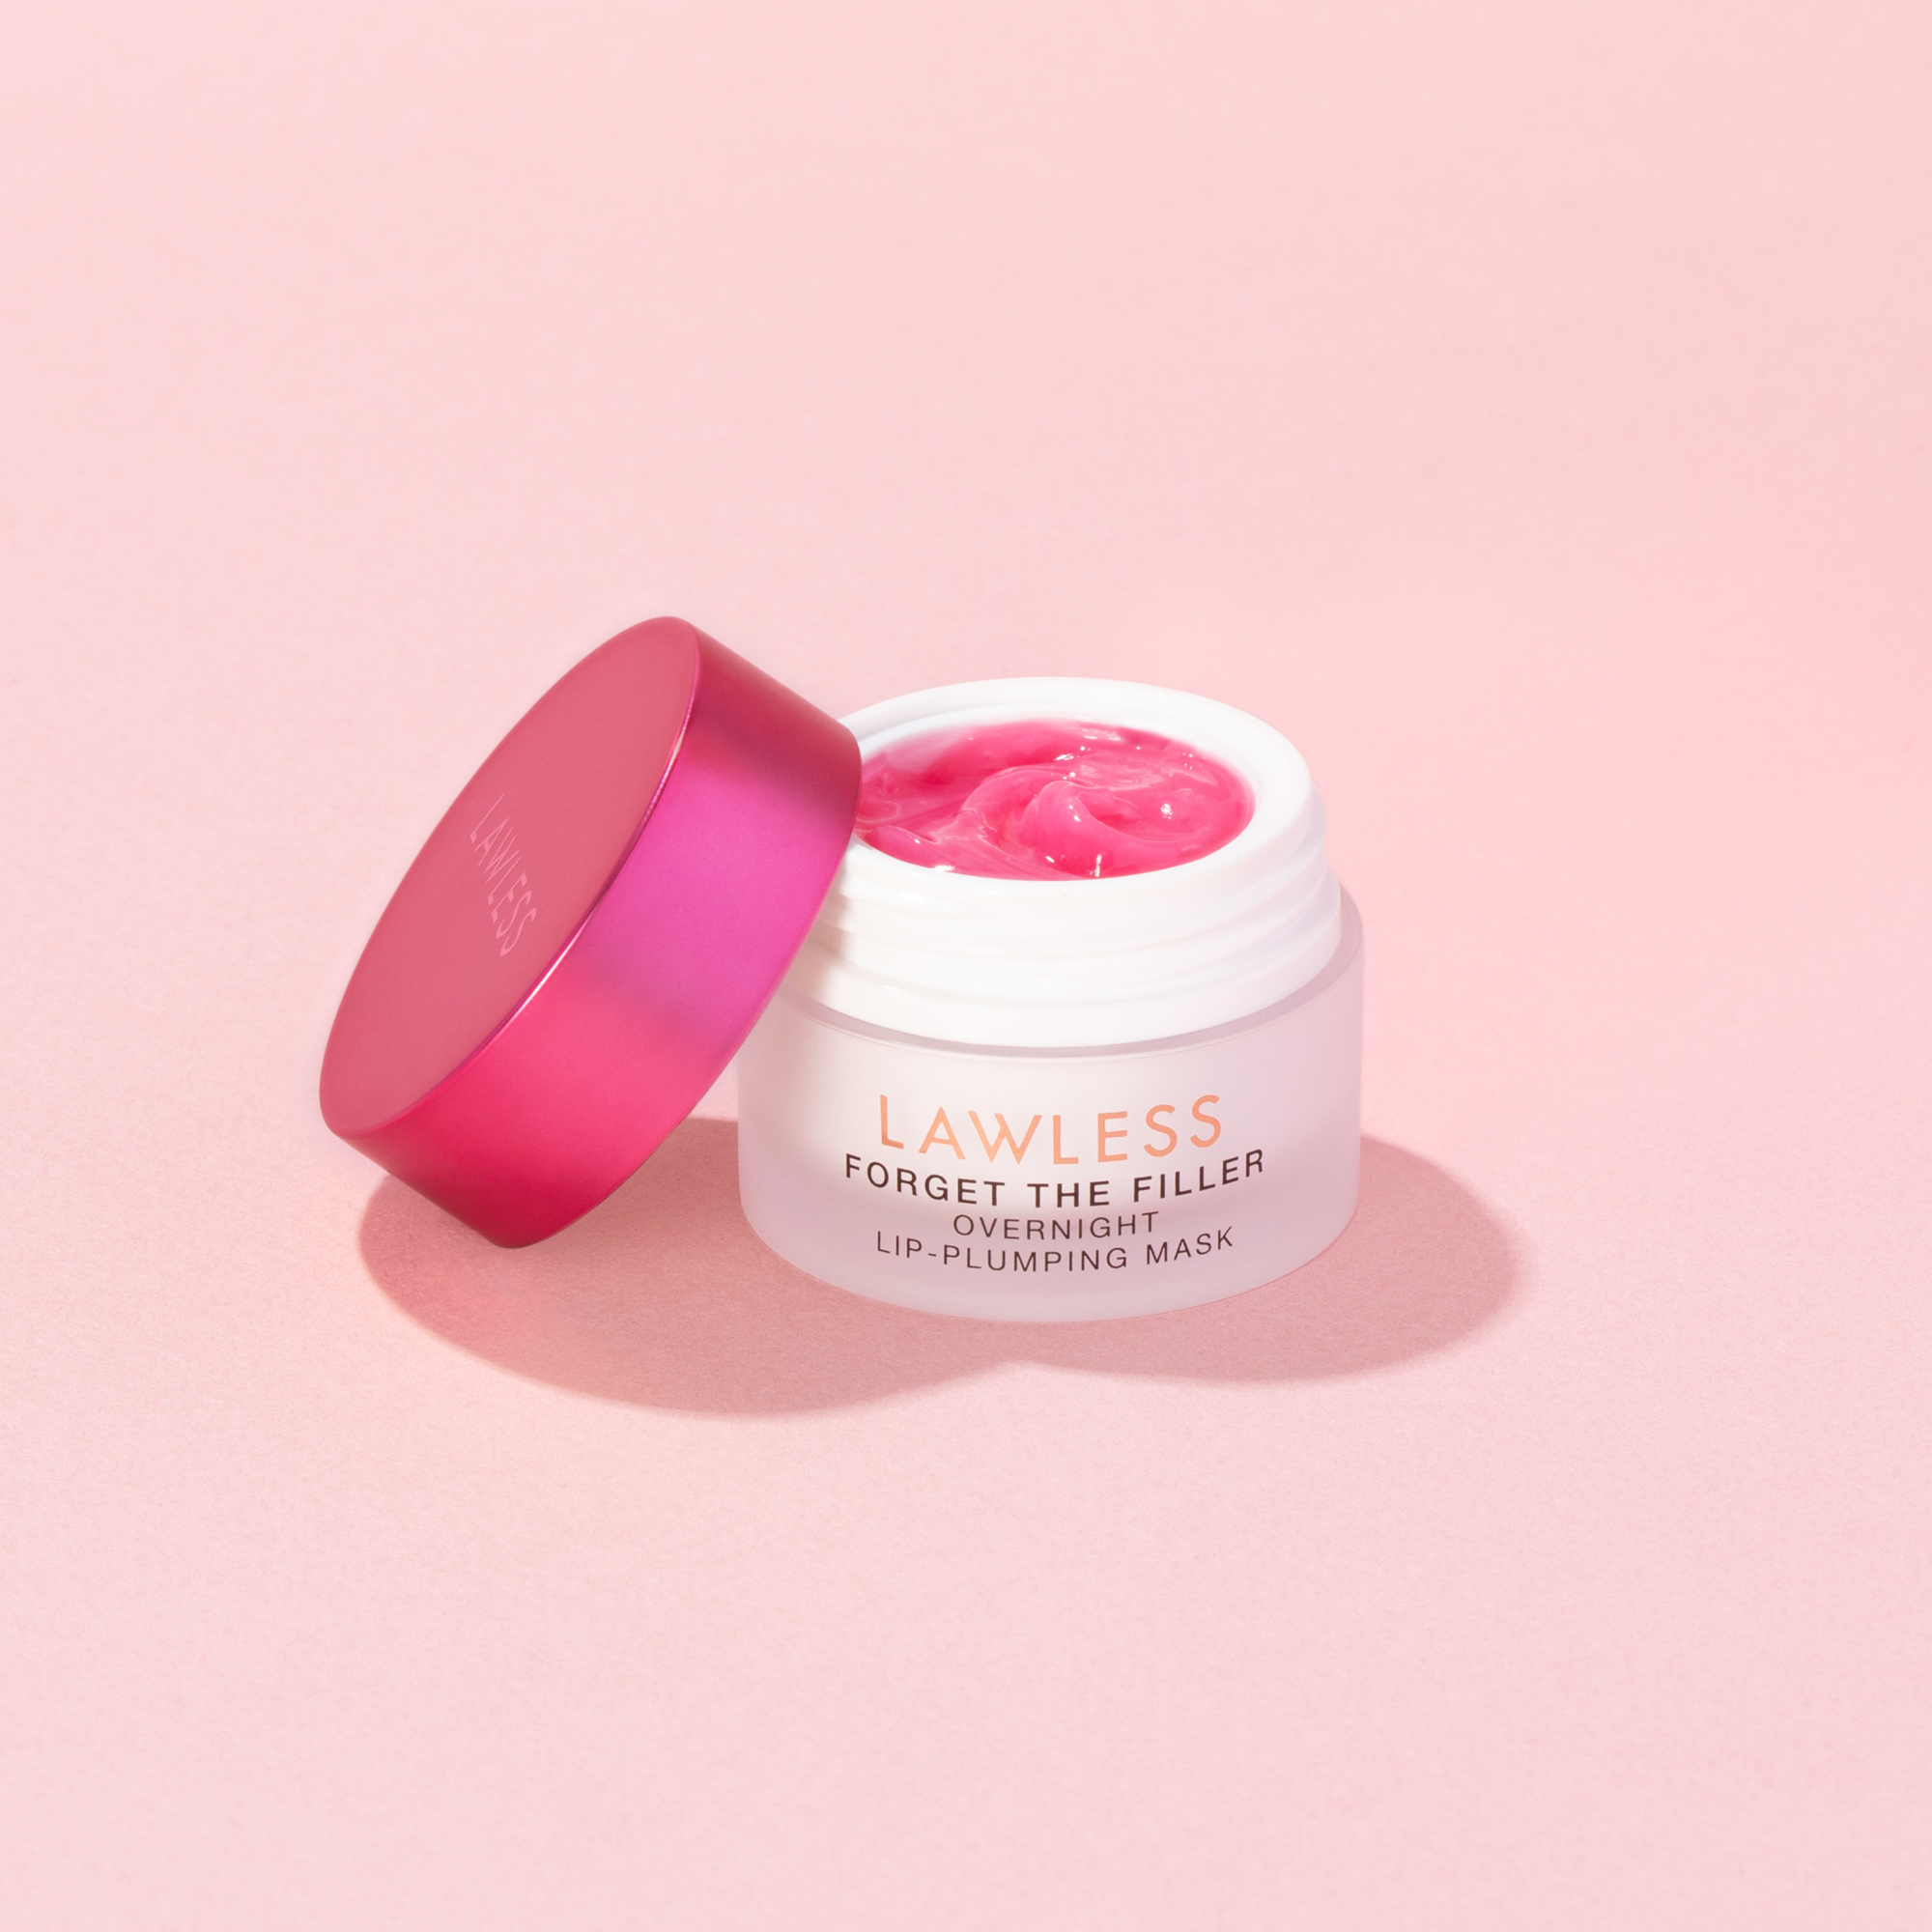 Lawless Forget The Filler Overnight Lip Plumping Mask